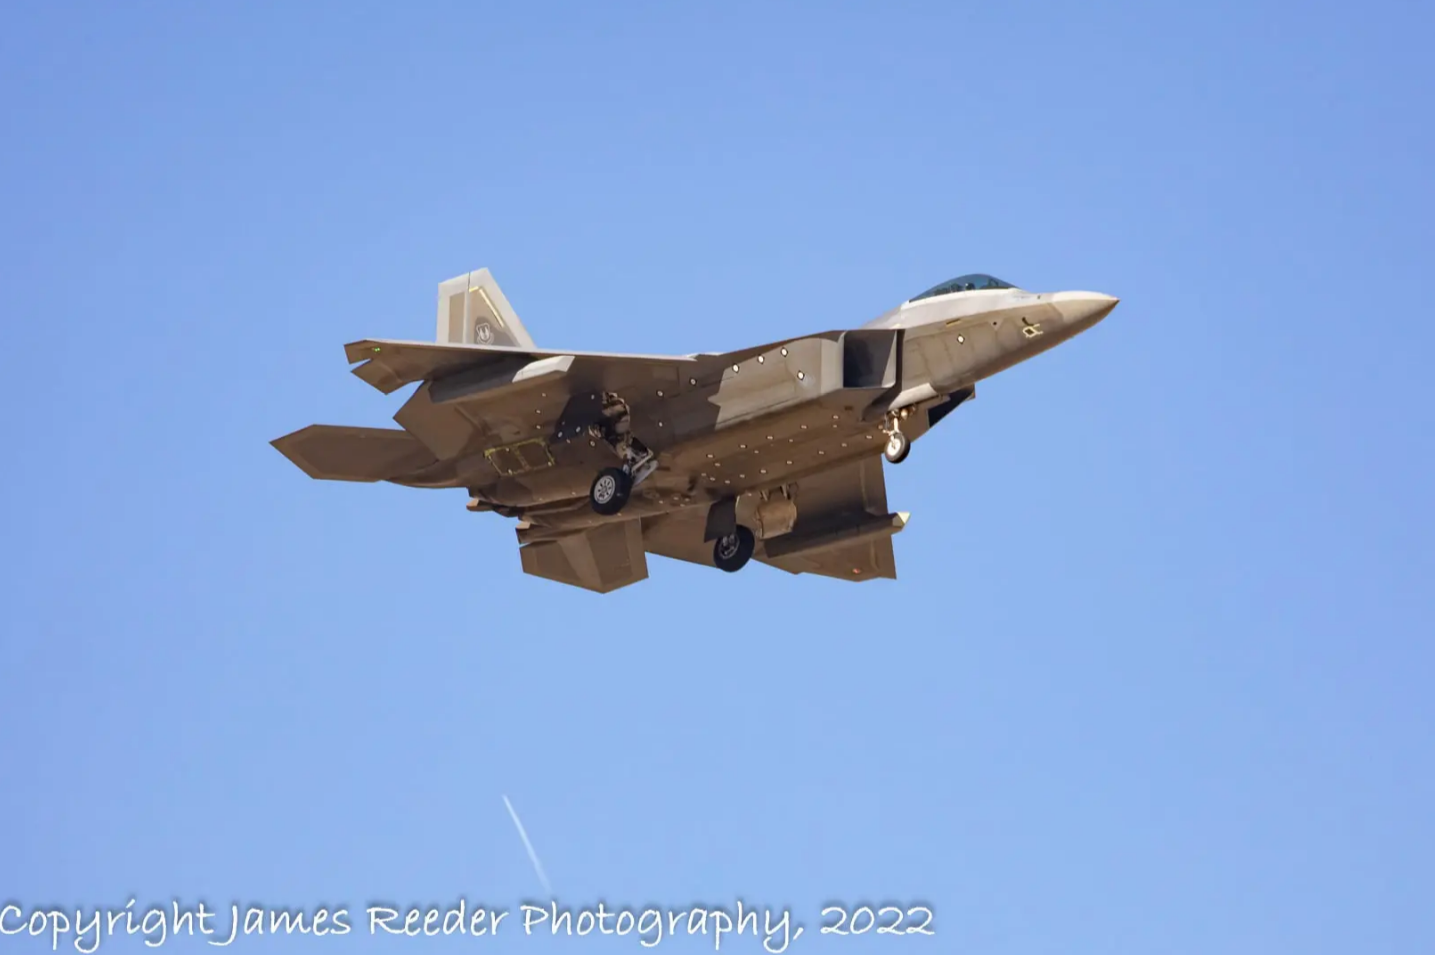 A test F-22 landing at Plant 42 with the same underwing pods as seen in the rendering. (Credit: James Reeder)